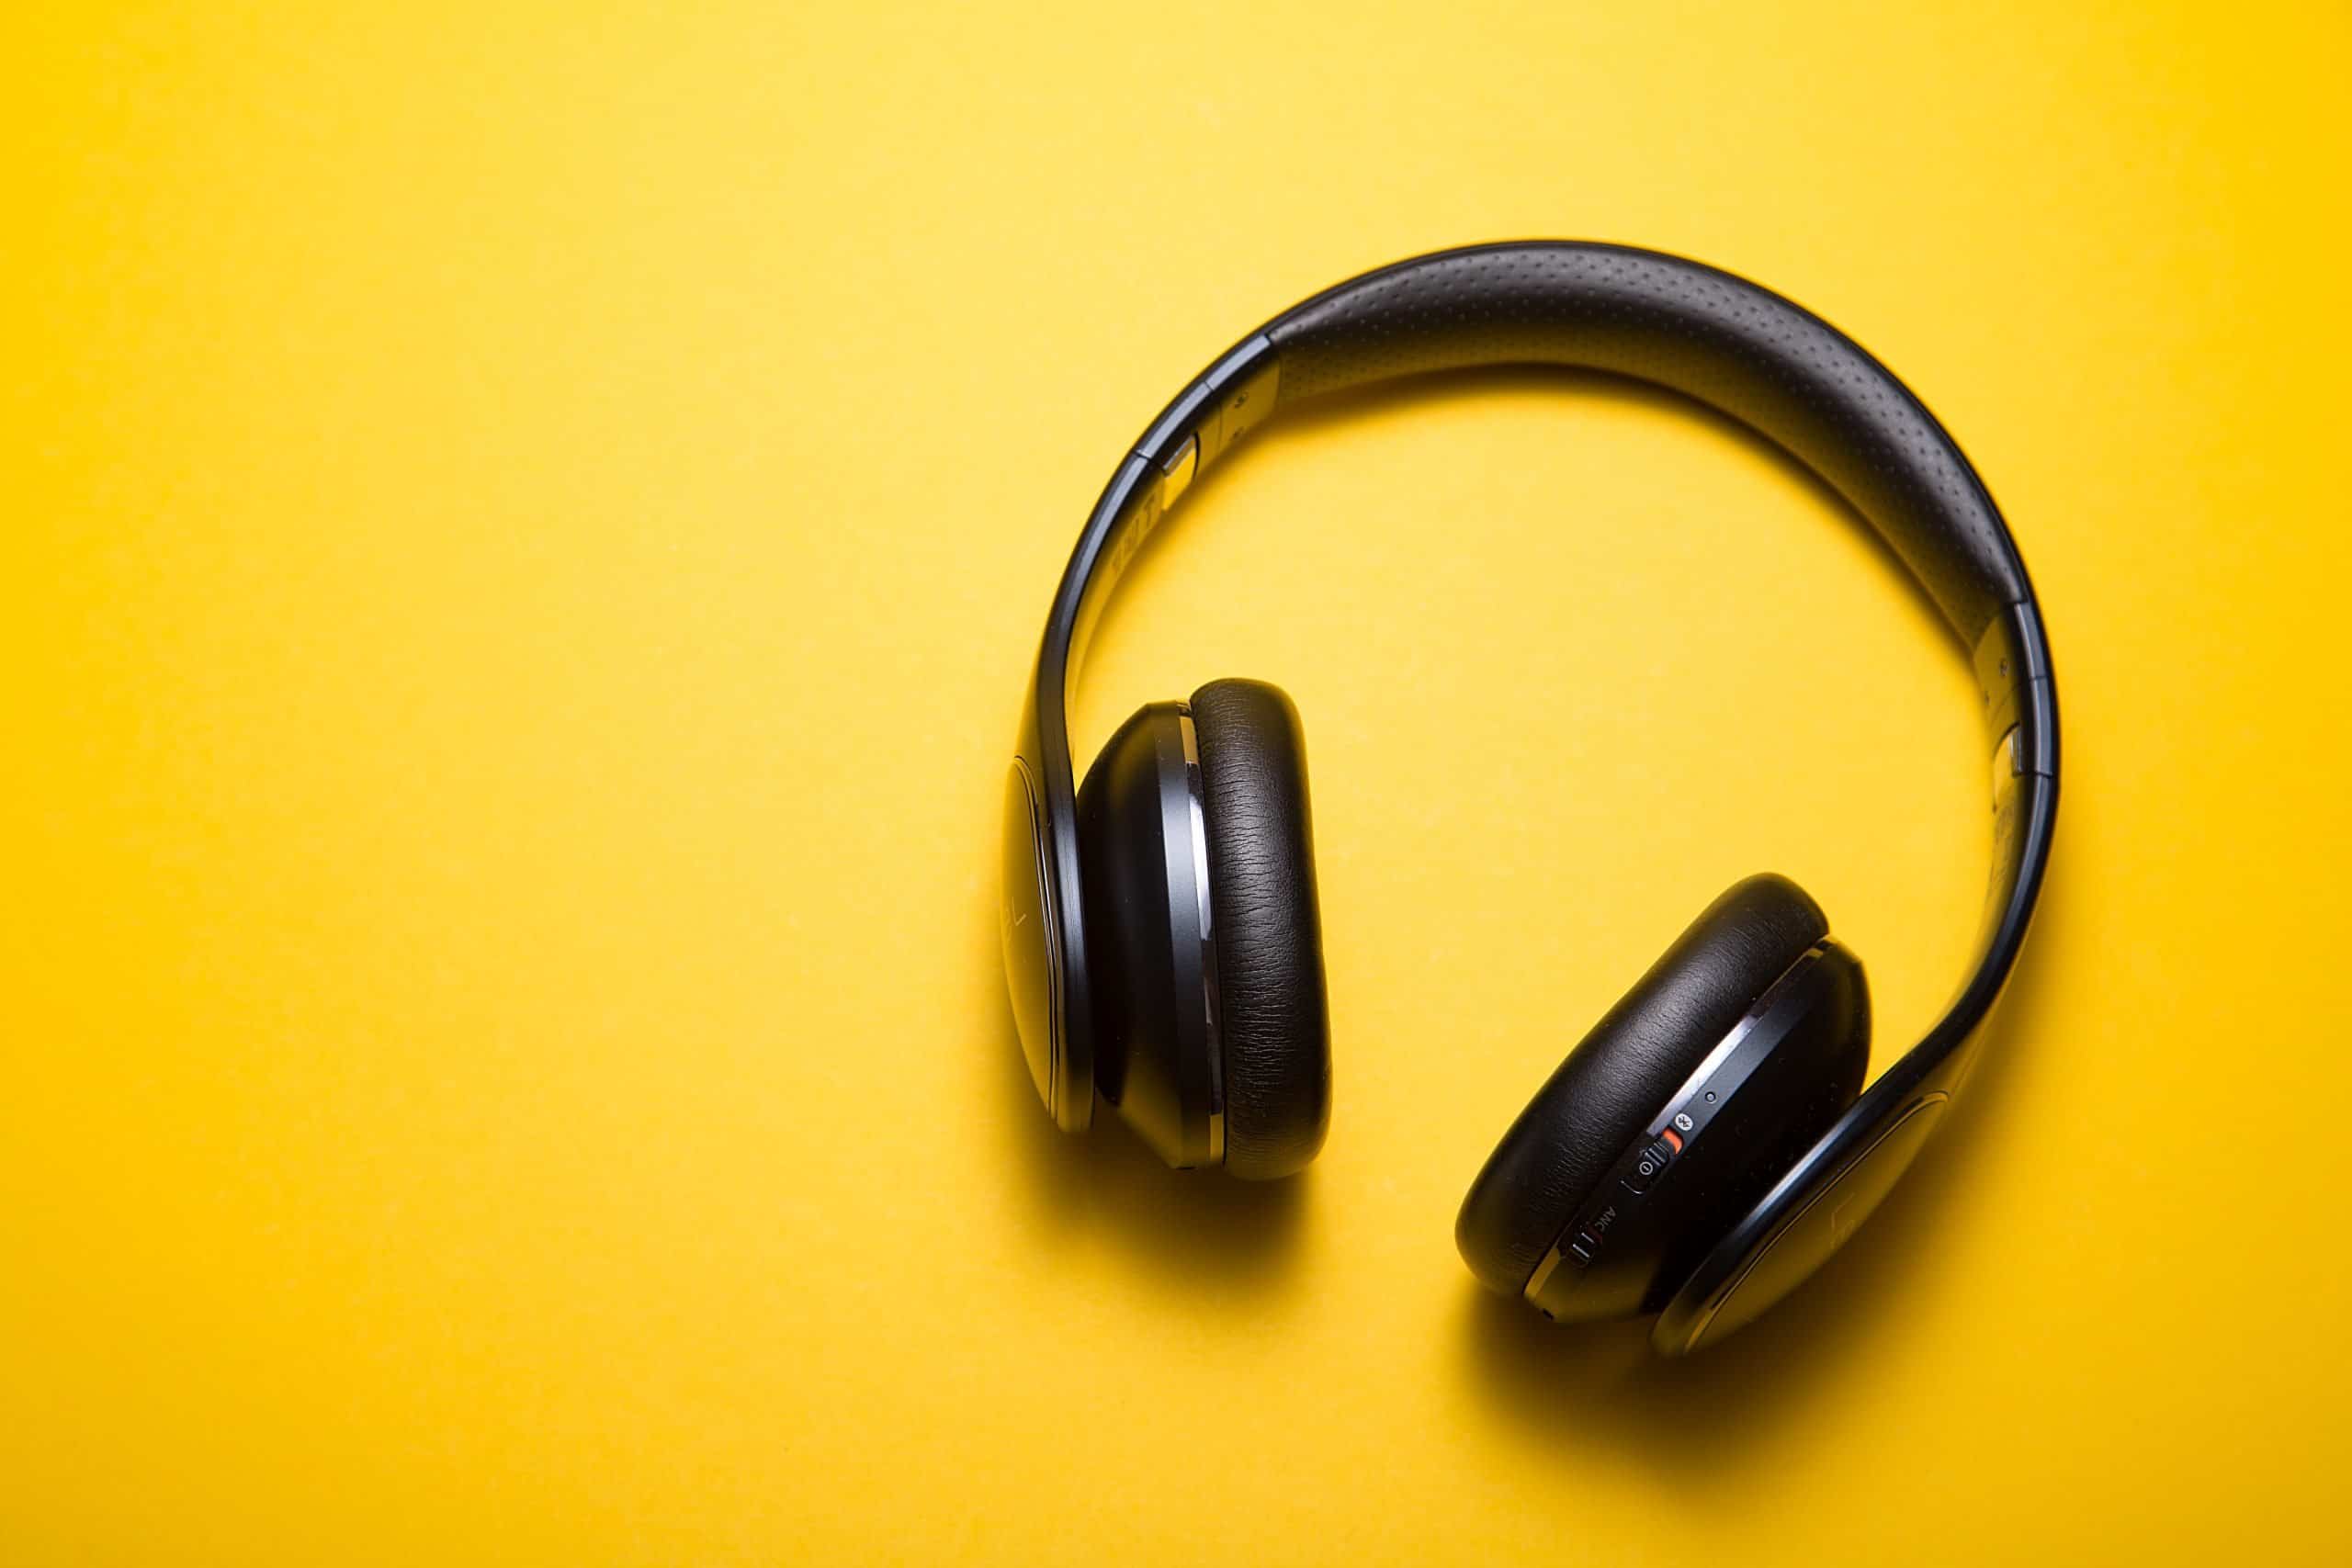 An earphone on a yellow background